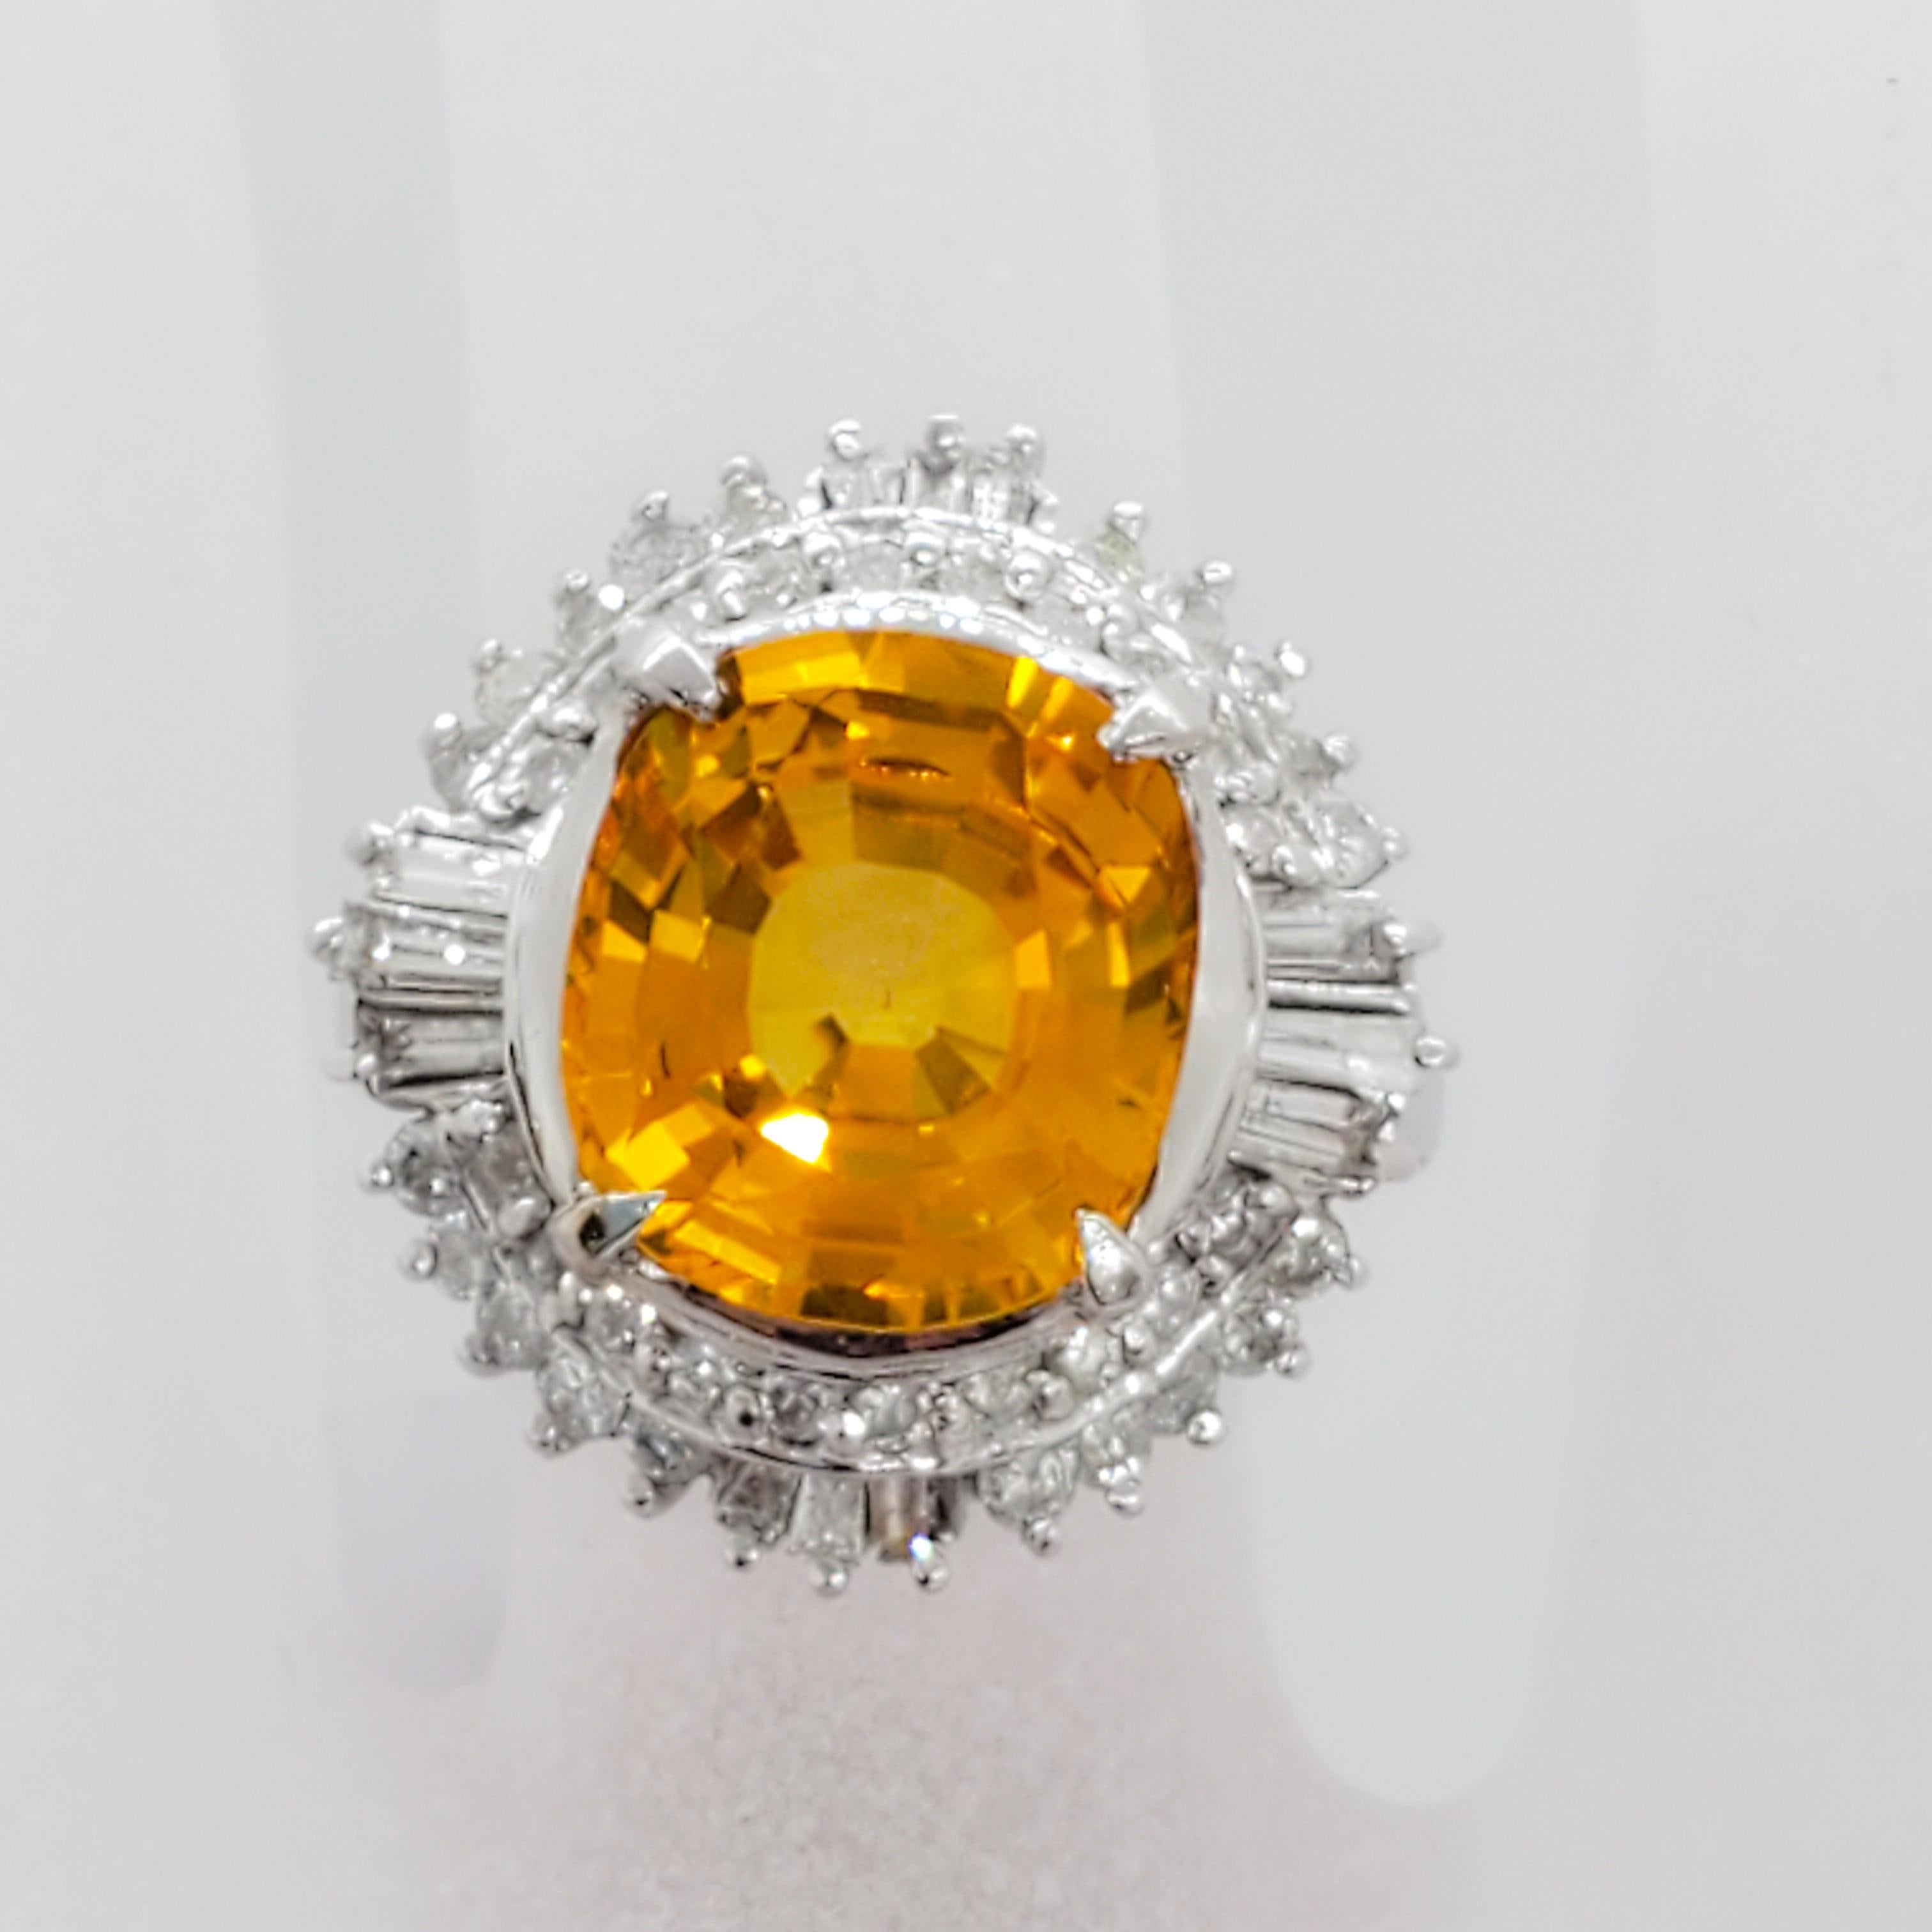 Gorgeous orange yellow Sri Lanka sapphire cushion with a deep orange yellow color weighing 6.36 ct. and 1.00 ct. of good quality white diamond baguettes and rounds. Handmade mounting in platinum. Ring size 6. Estate ring in mint condition. GIA